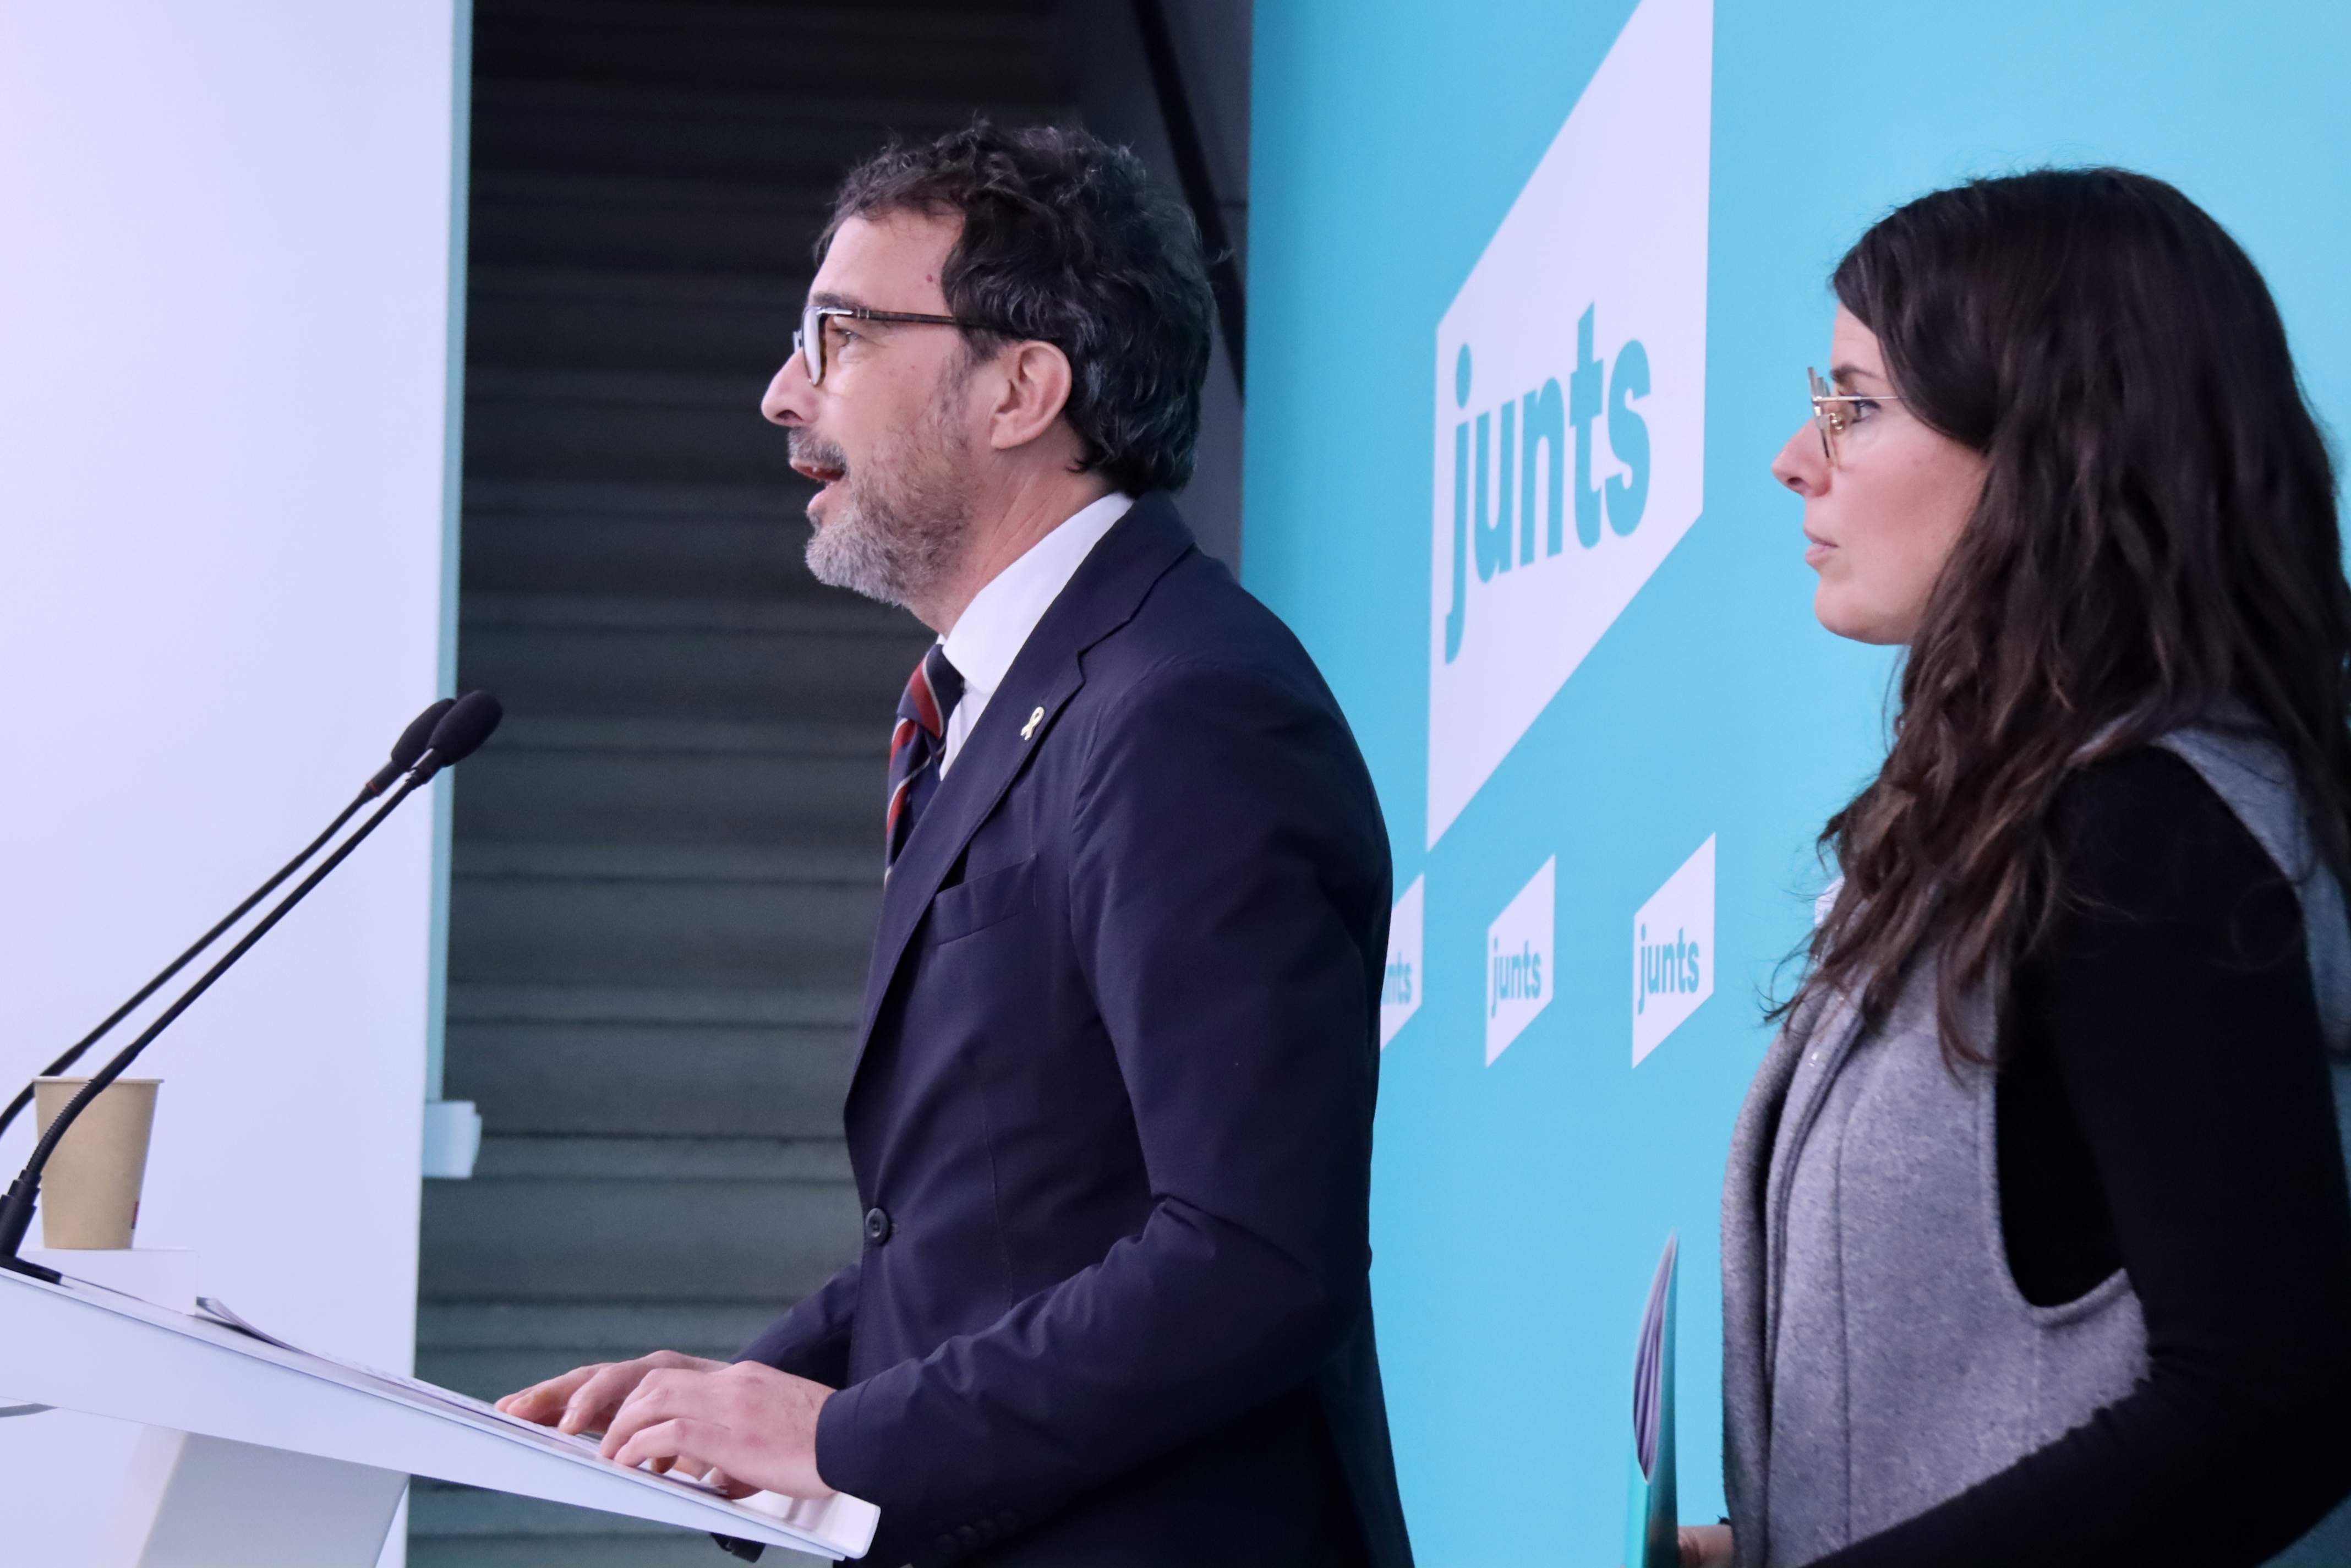 Junts opens door to saving Catalan budget from rejection if inheritance tax is eliminated